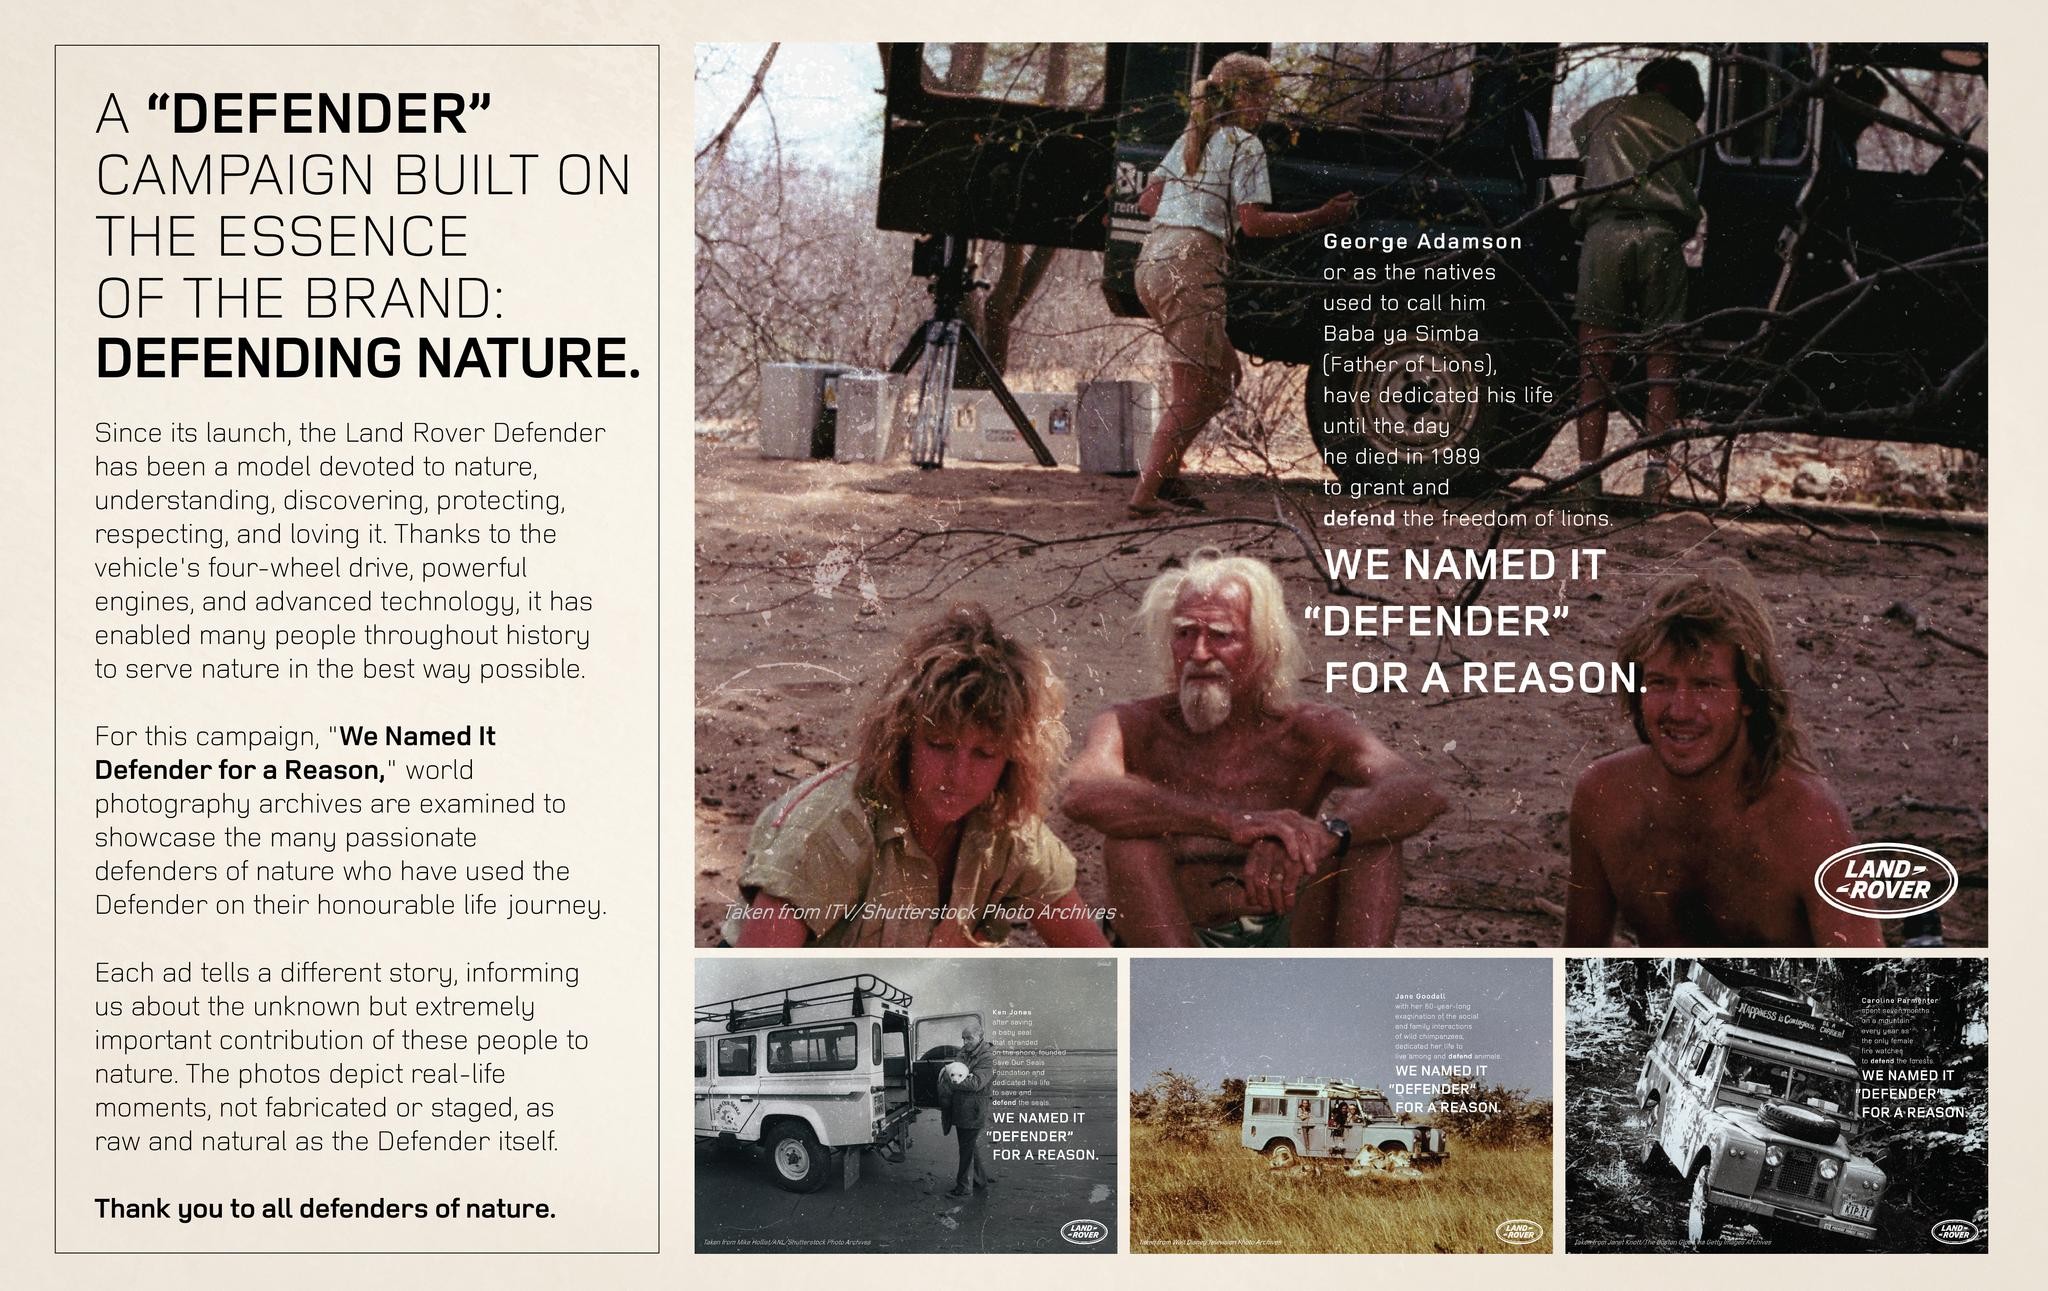 We Named It ''Defender'' For A Reason - George Adamson